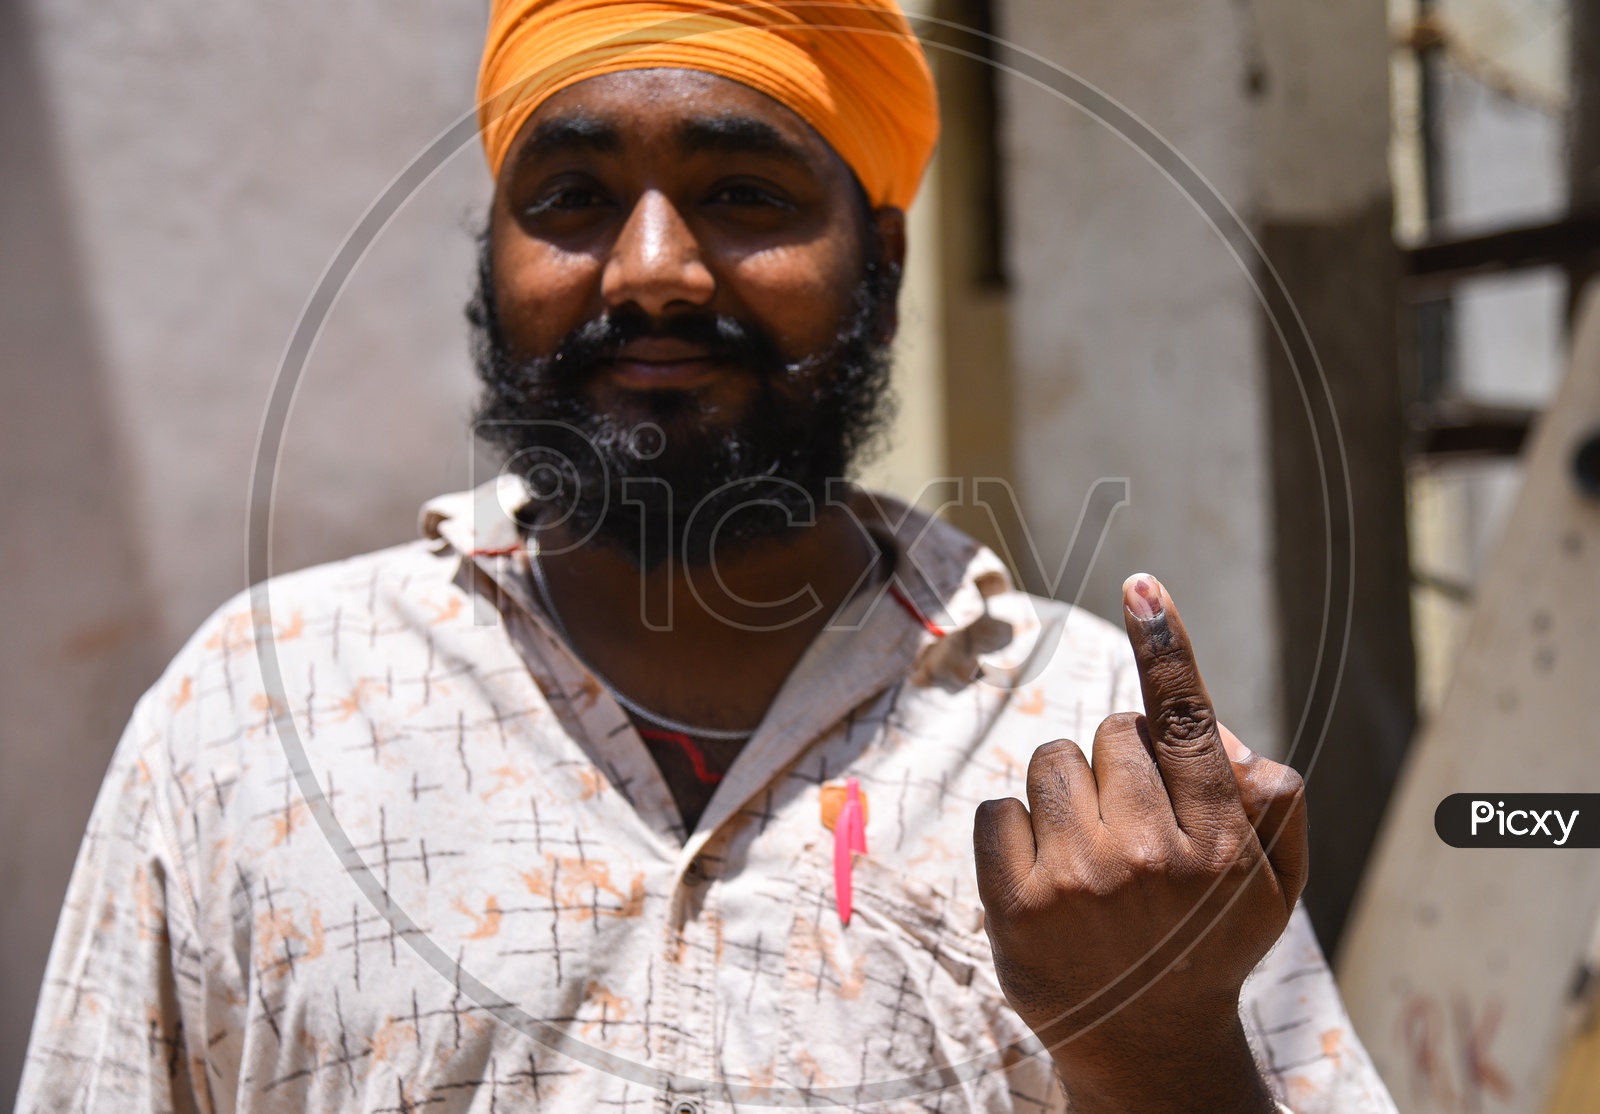 A Sikh Voter showing his Inked finger after voting.